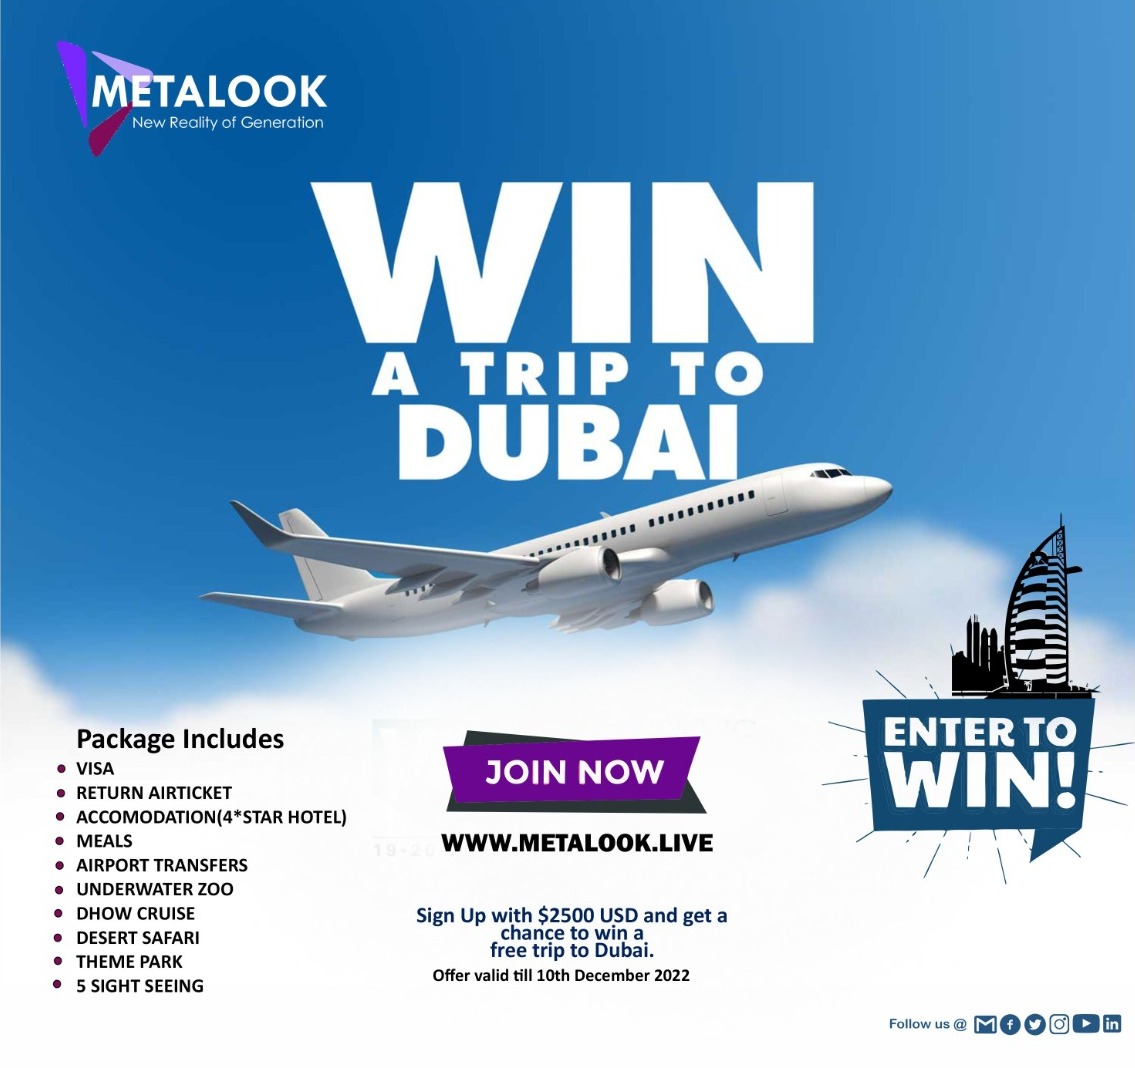 Win a free trip to Dubai...
Offer valid till 10th of December...
Sign up with $2500 USD and get a chance to win free tour package to Dubai..
metalook.live
#freetours #freetour #travelgram #travel #freewalkingtour #freewalkingtours #walking #Dubai